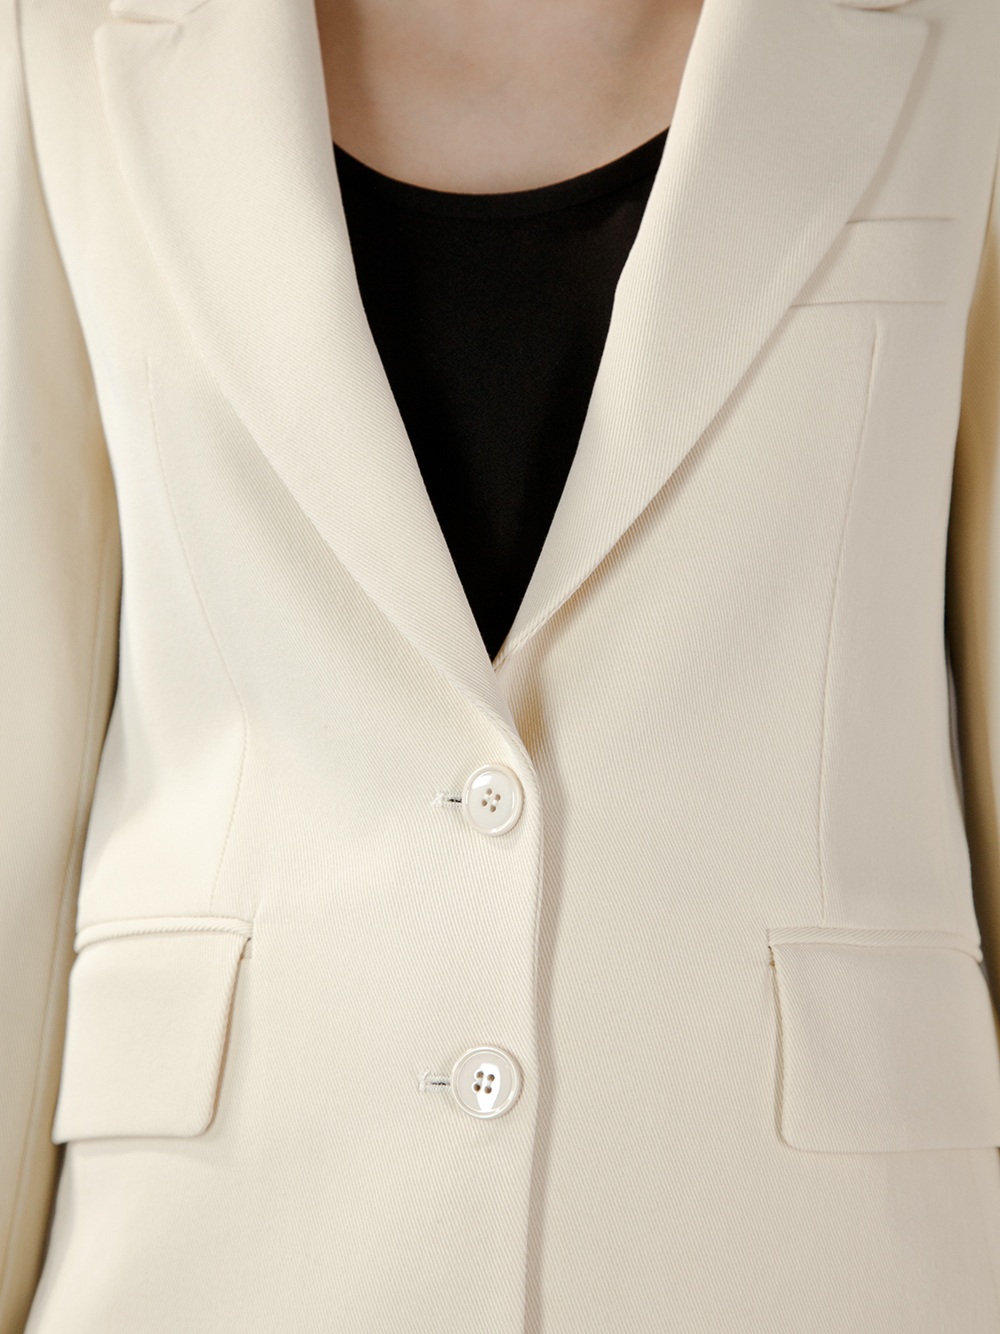 Lyst - Golden Goose Deluxe Brand Single Breasted Blazer in Natural